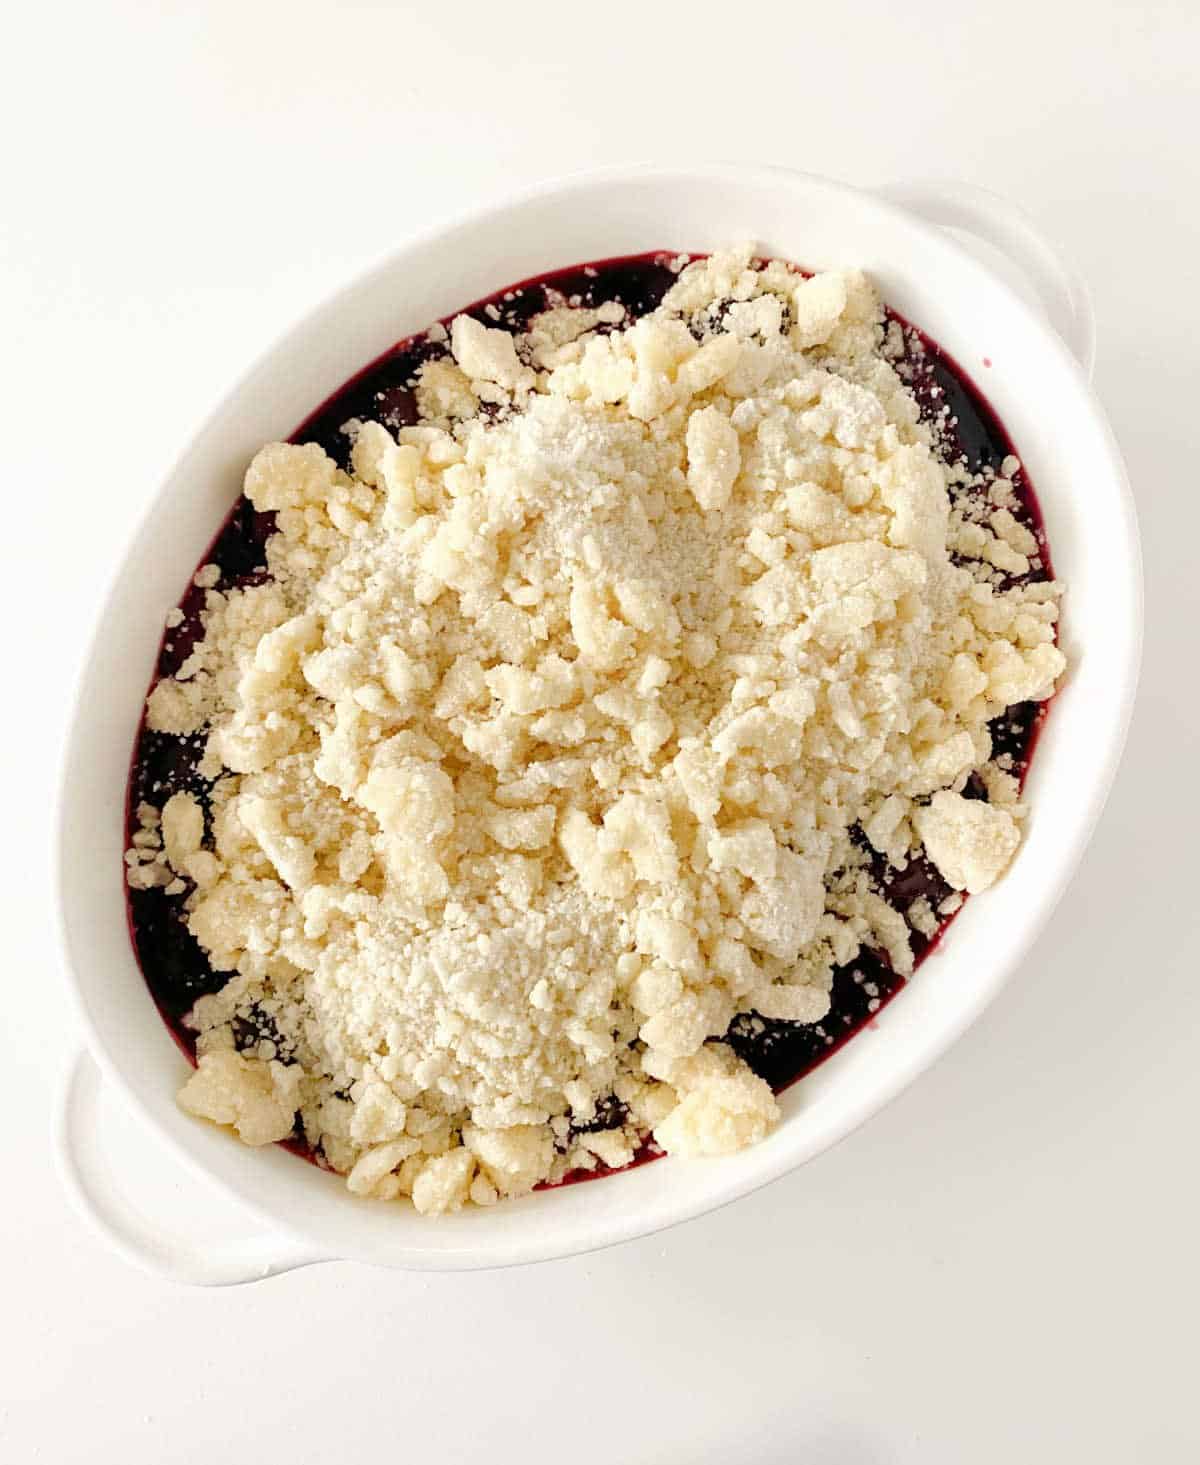 Unbaked cherry dump cake in oval white dish on white surface, top view.